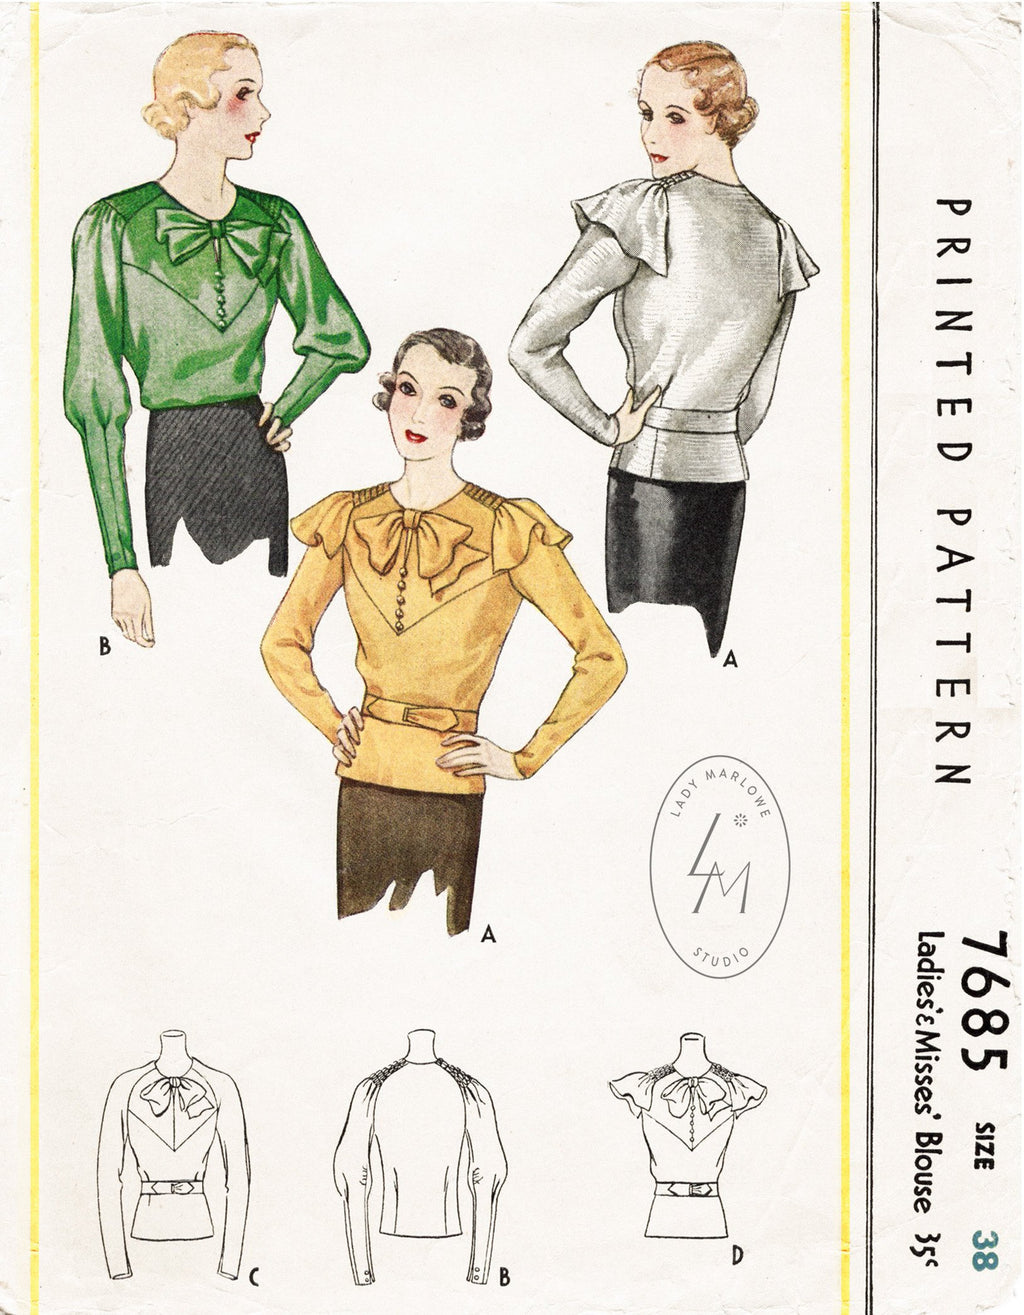 McCall 7685 1930s blouse vintage sewing pattern 1930